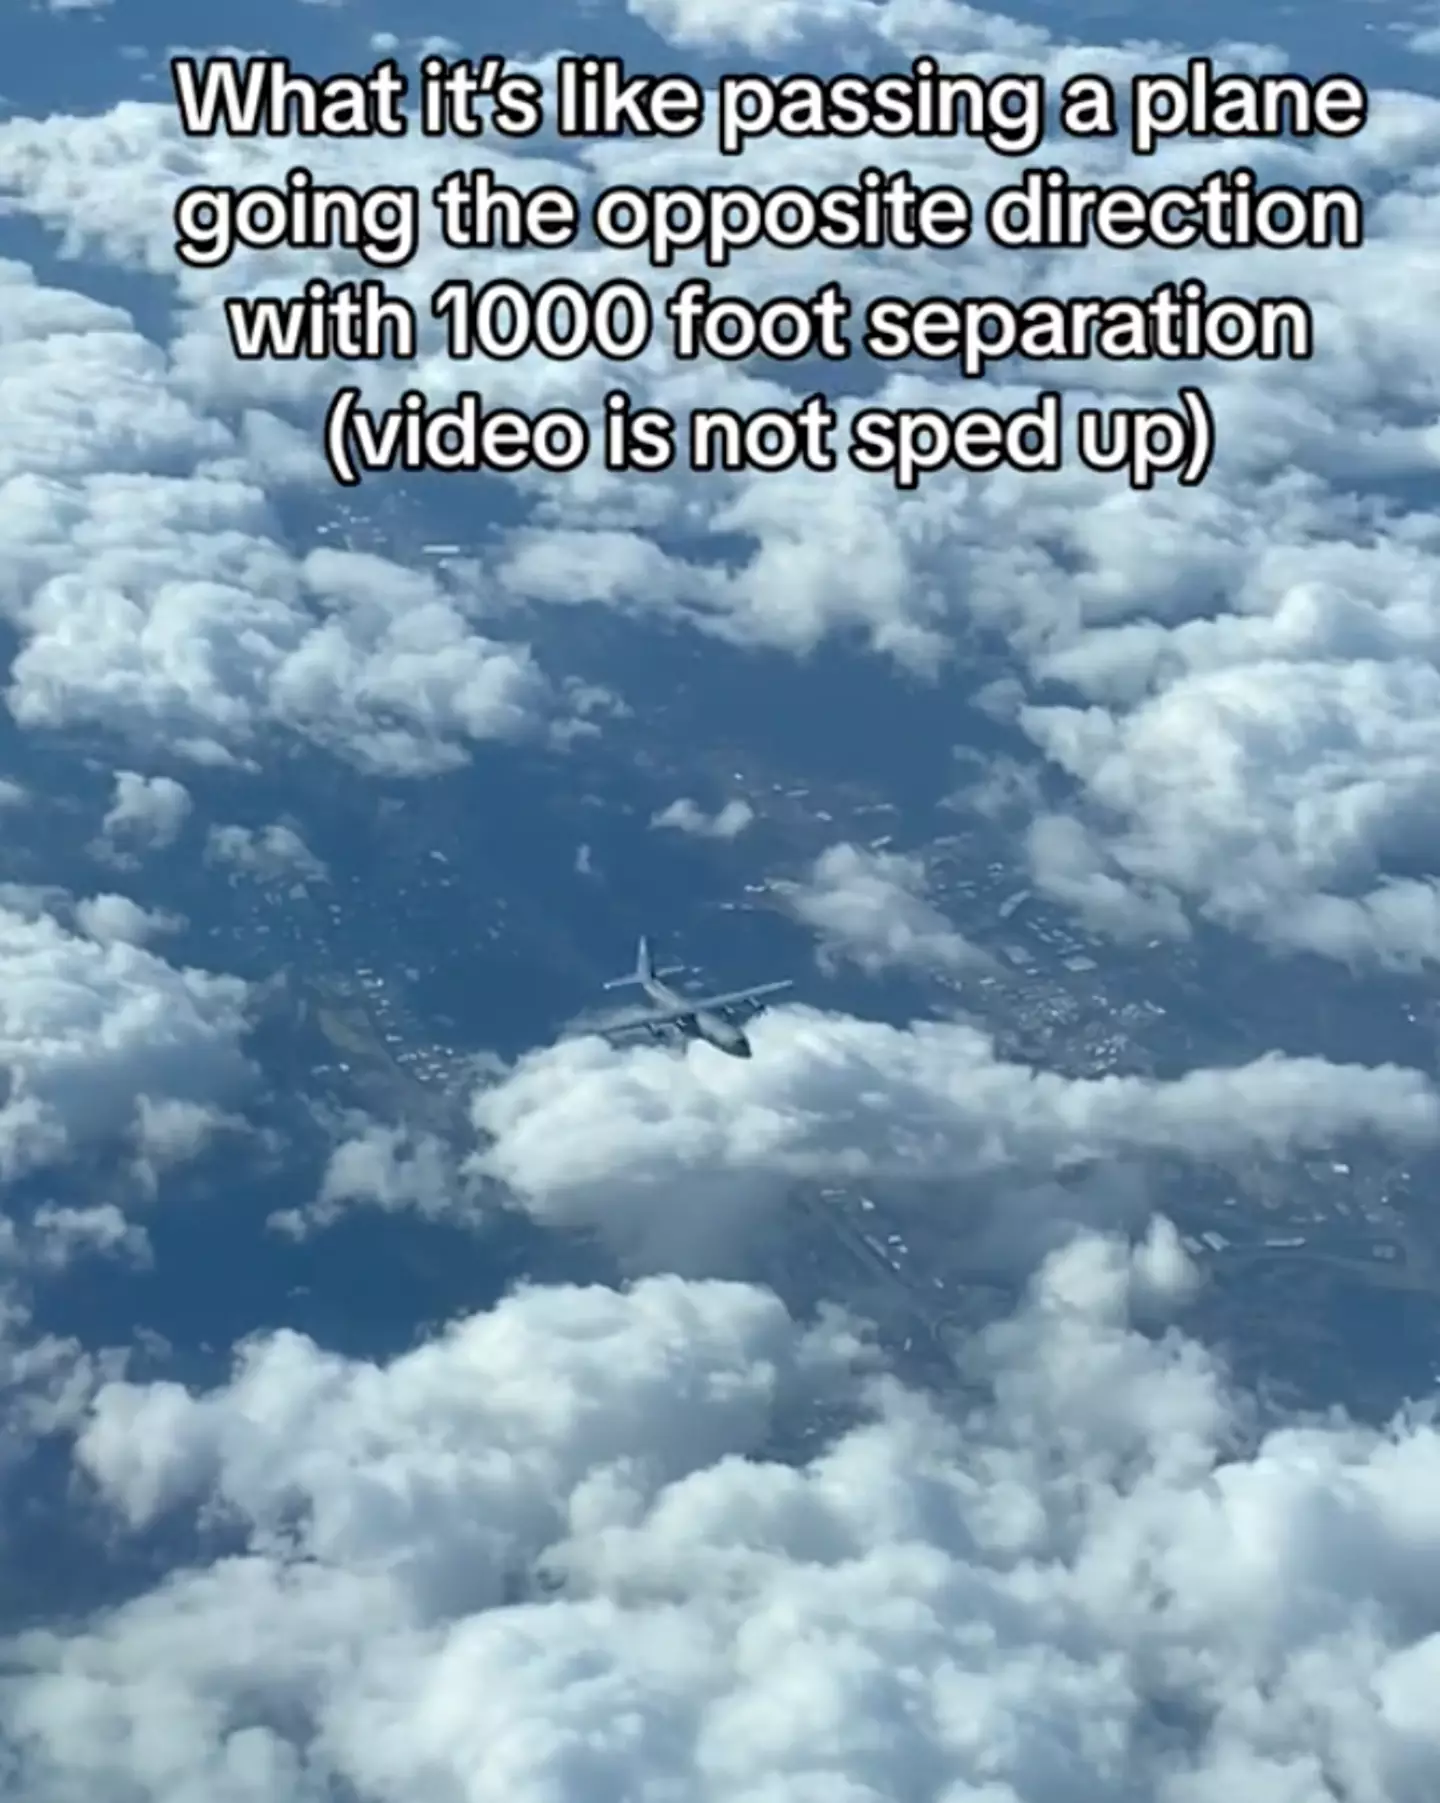 The video shows two military planes passing each other at a height difference of just 1,000 feet.